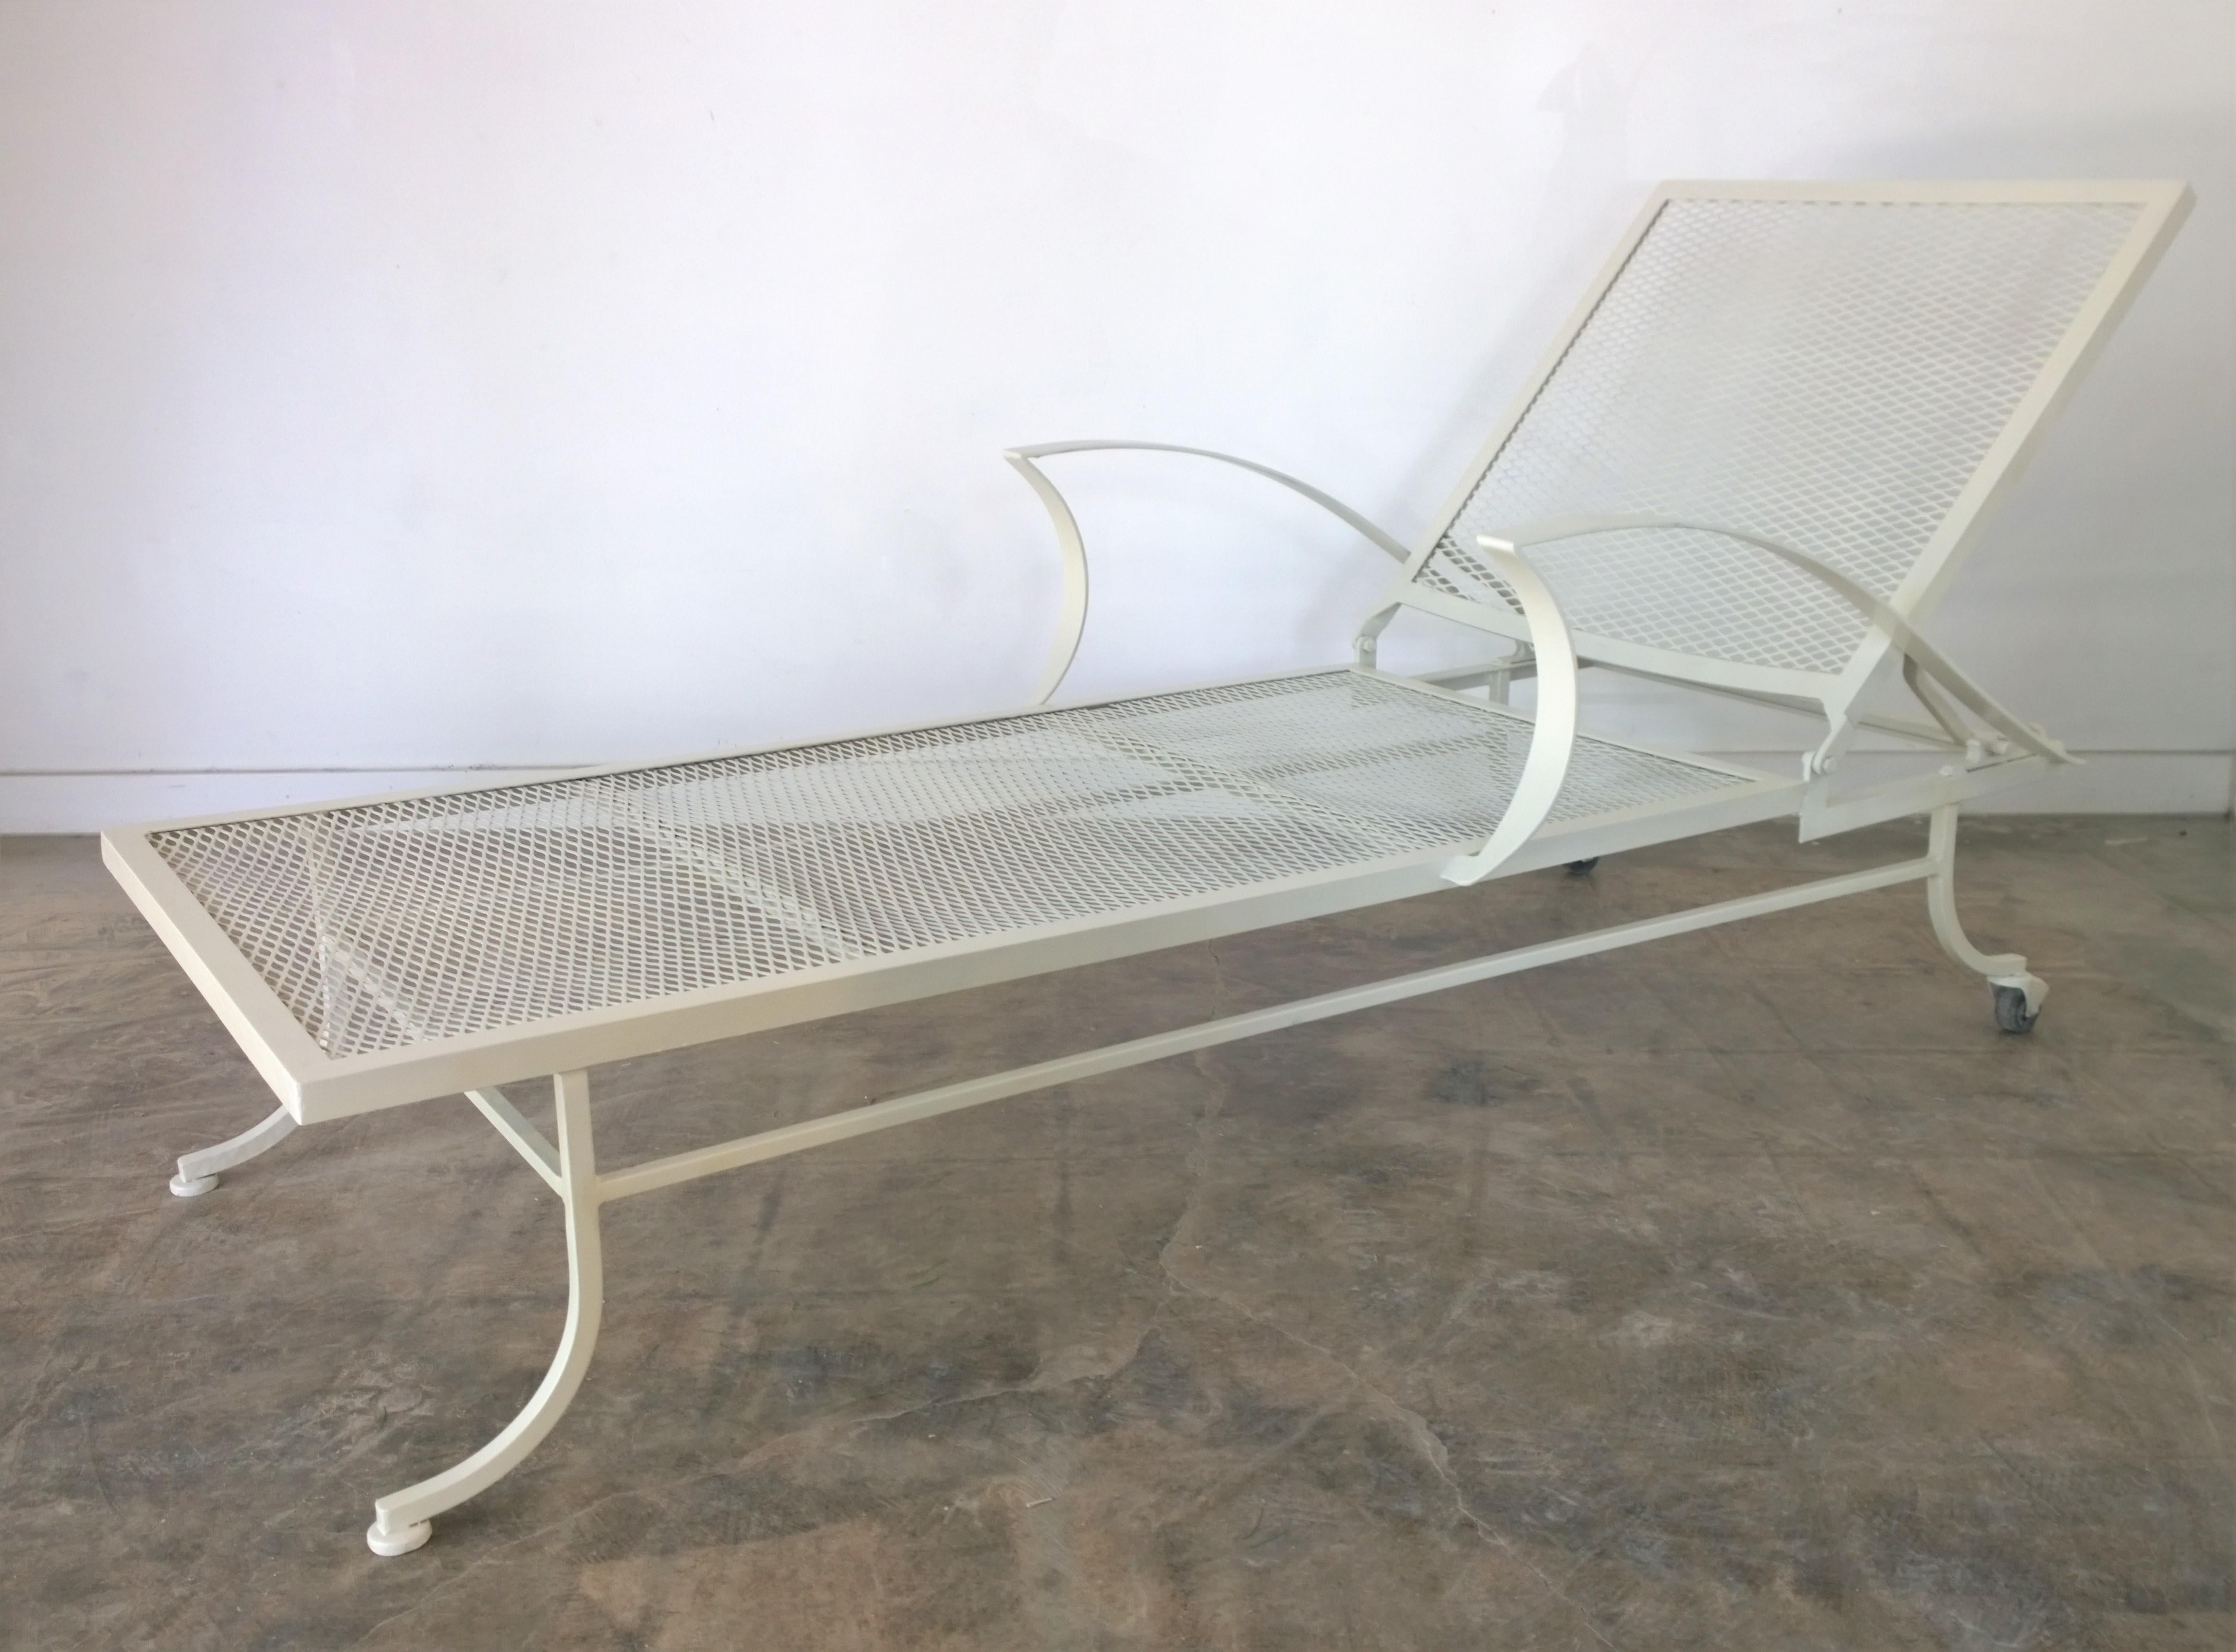 Bob Anderson Newly Enameled Off-White Wrought Iron Patio / Garden Chaise Lounge (Postmoderne) im Angebot